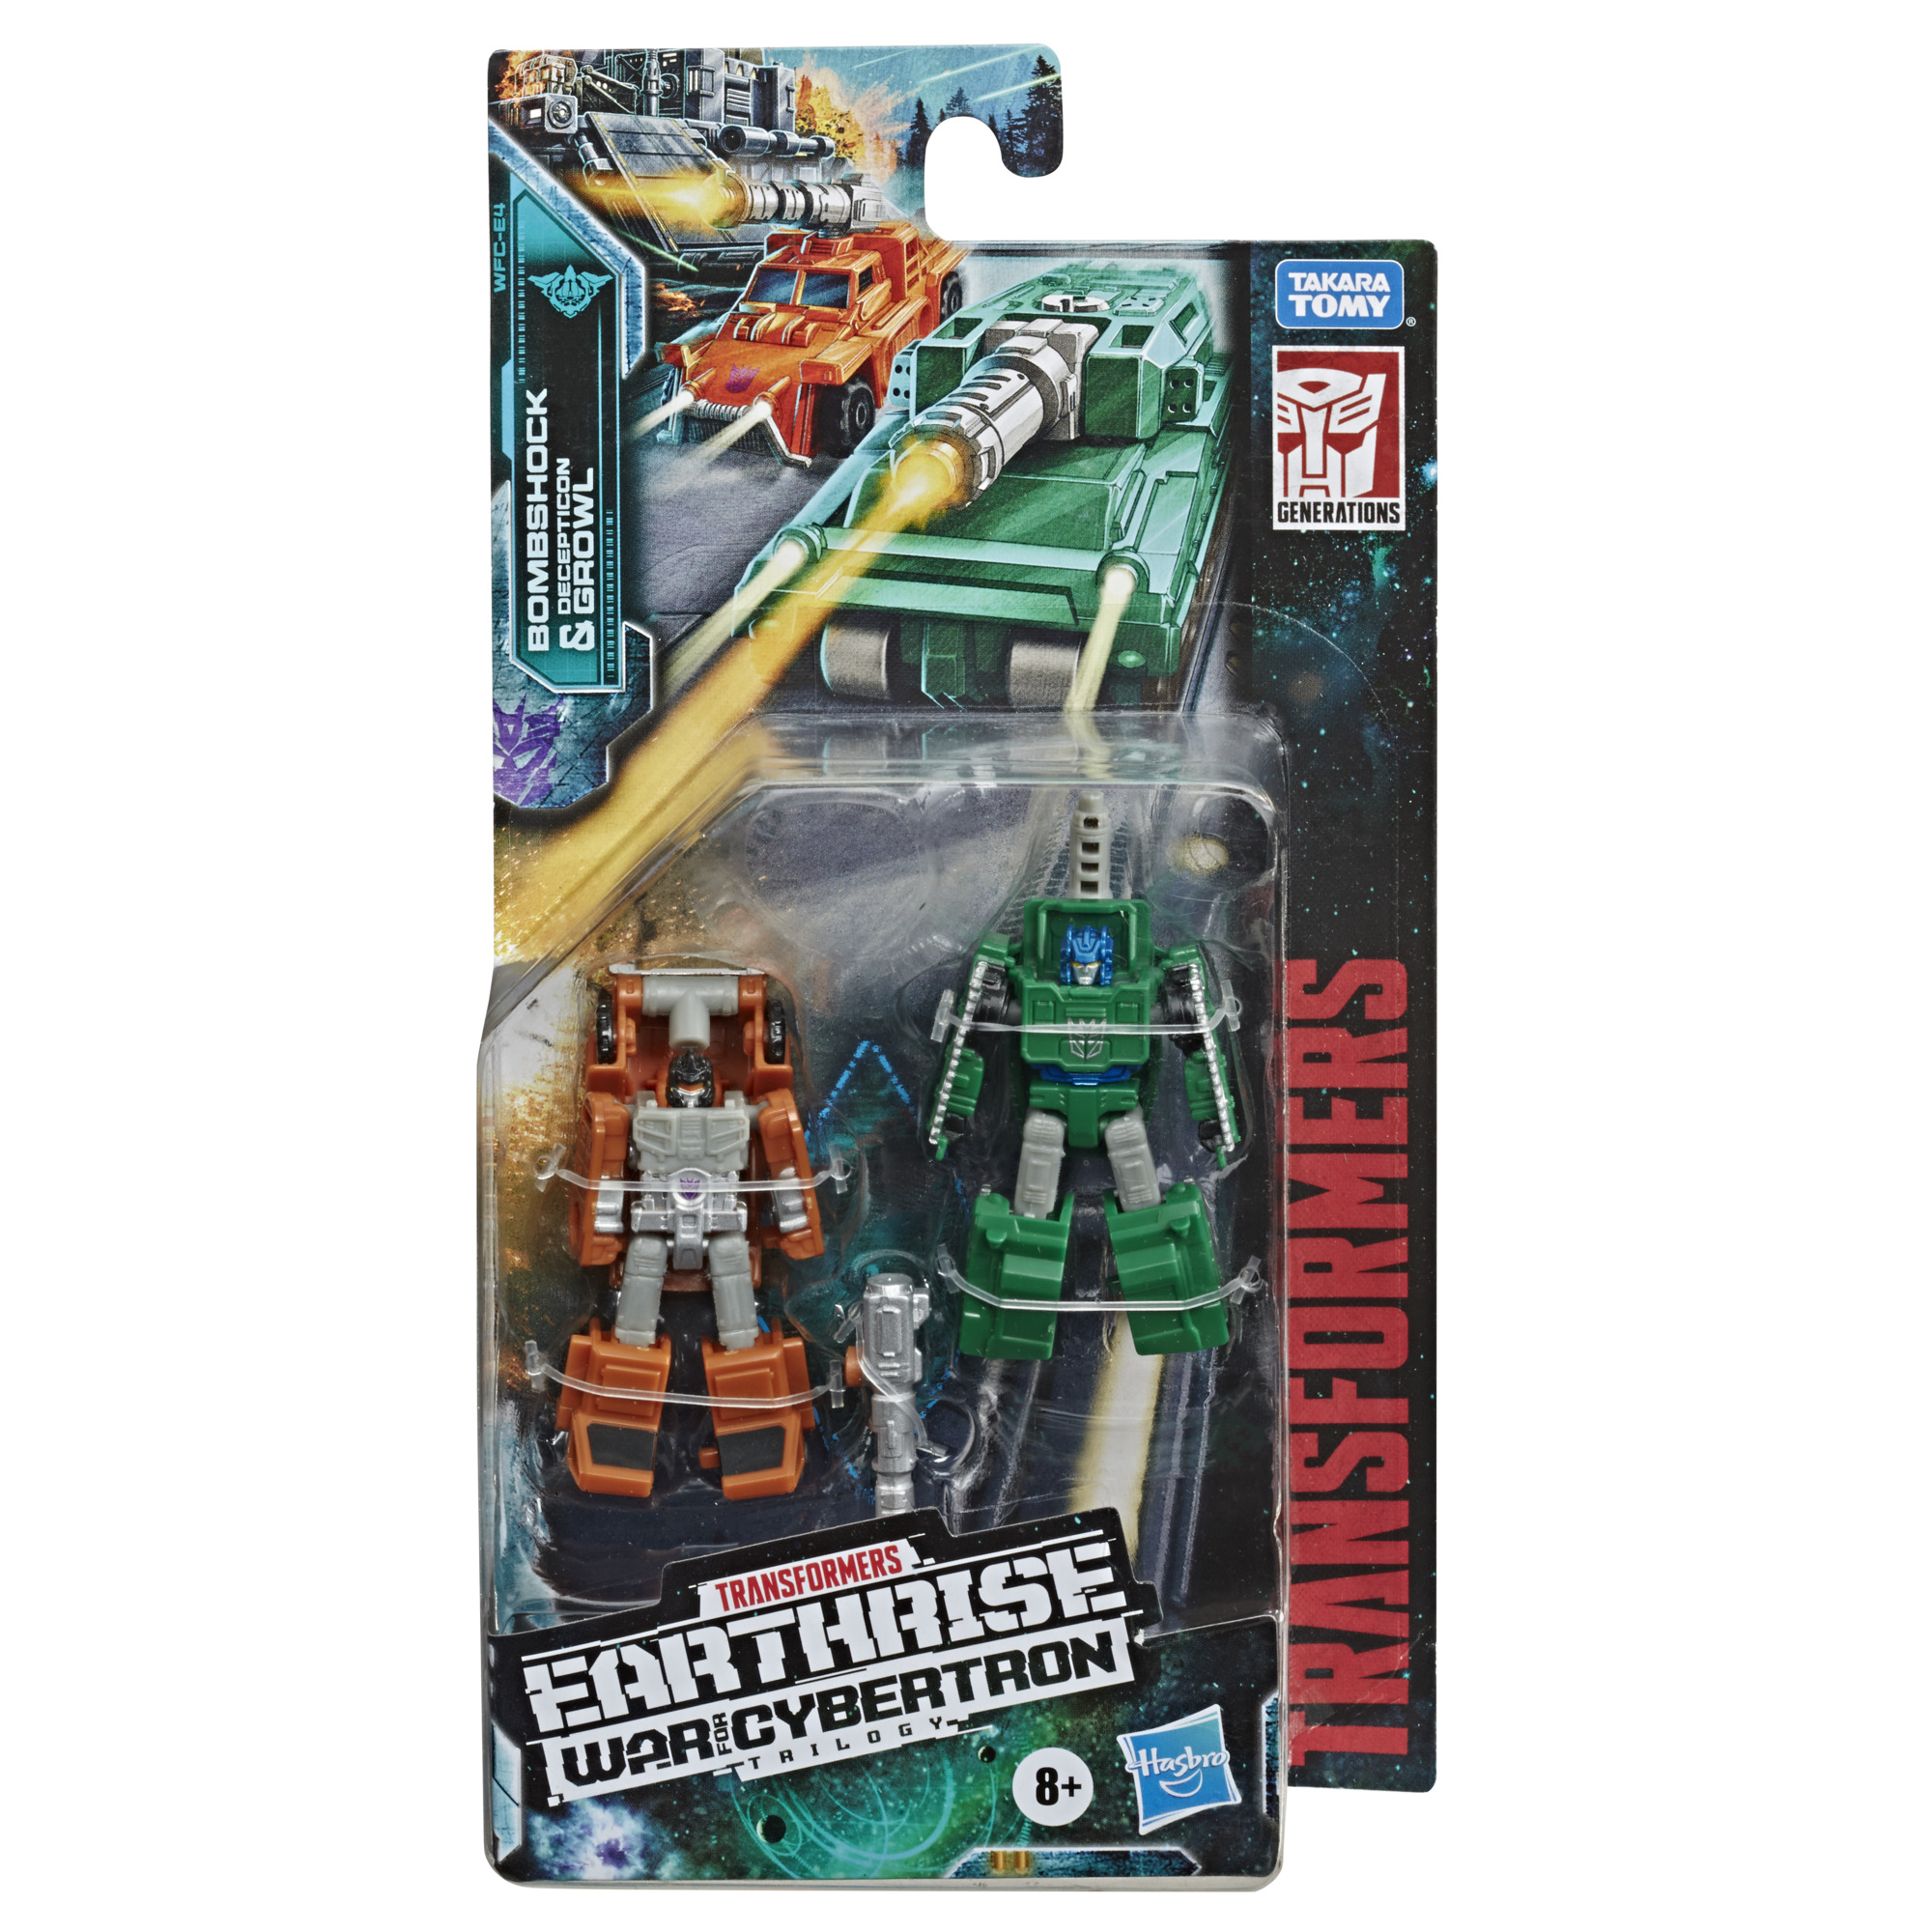 Transformers: Earthrise War for Cybertron Trilogy Bomb Shock and Deception Growl Toy Vehicle Action Figure Set for Boys and Girls - image 3 of 3